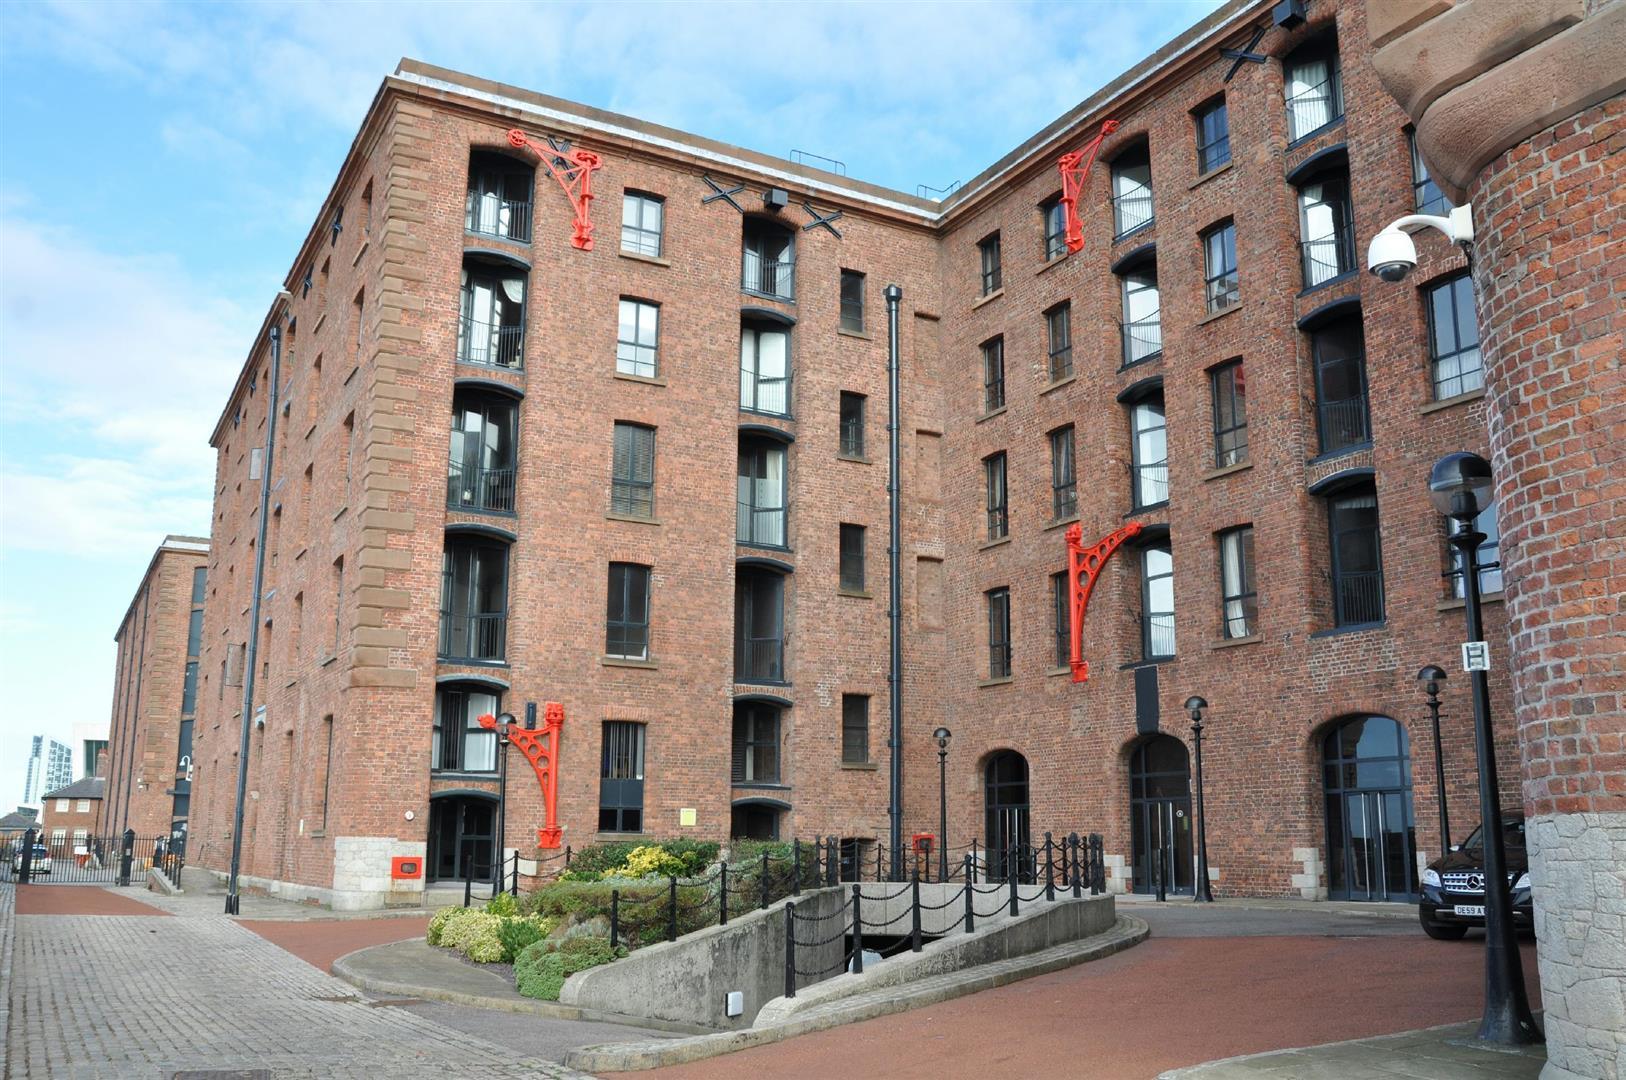 Albert Dock - The Colonnades - City Residential